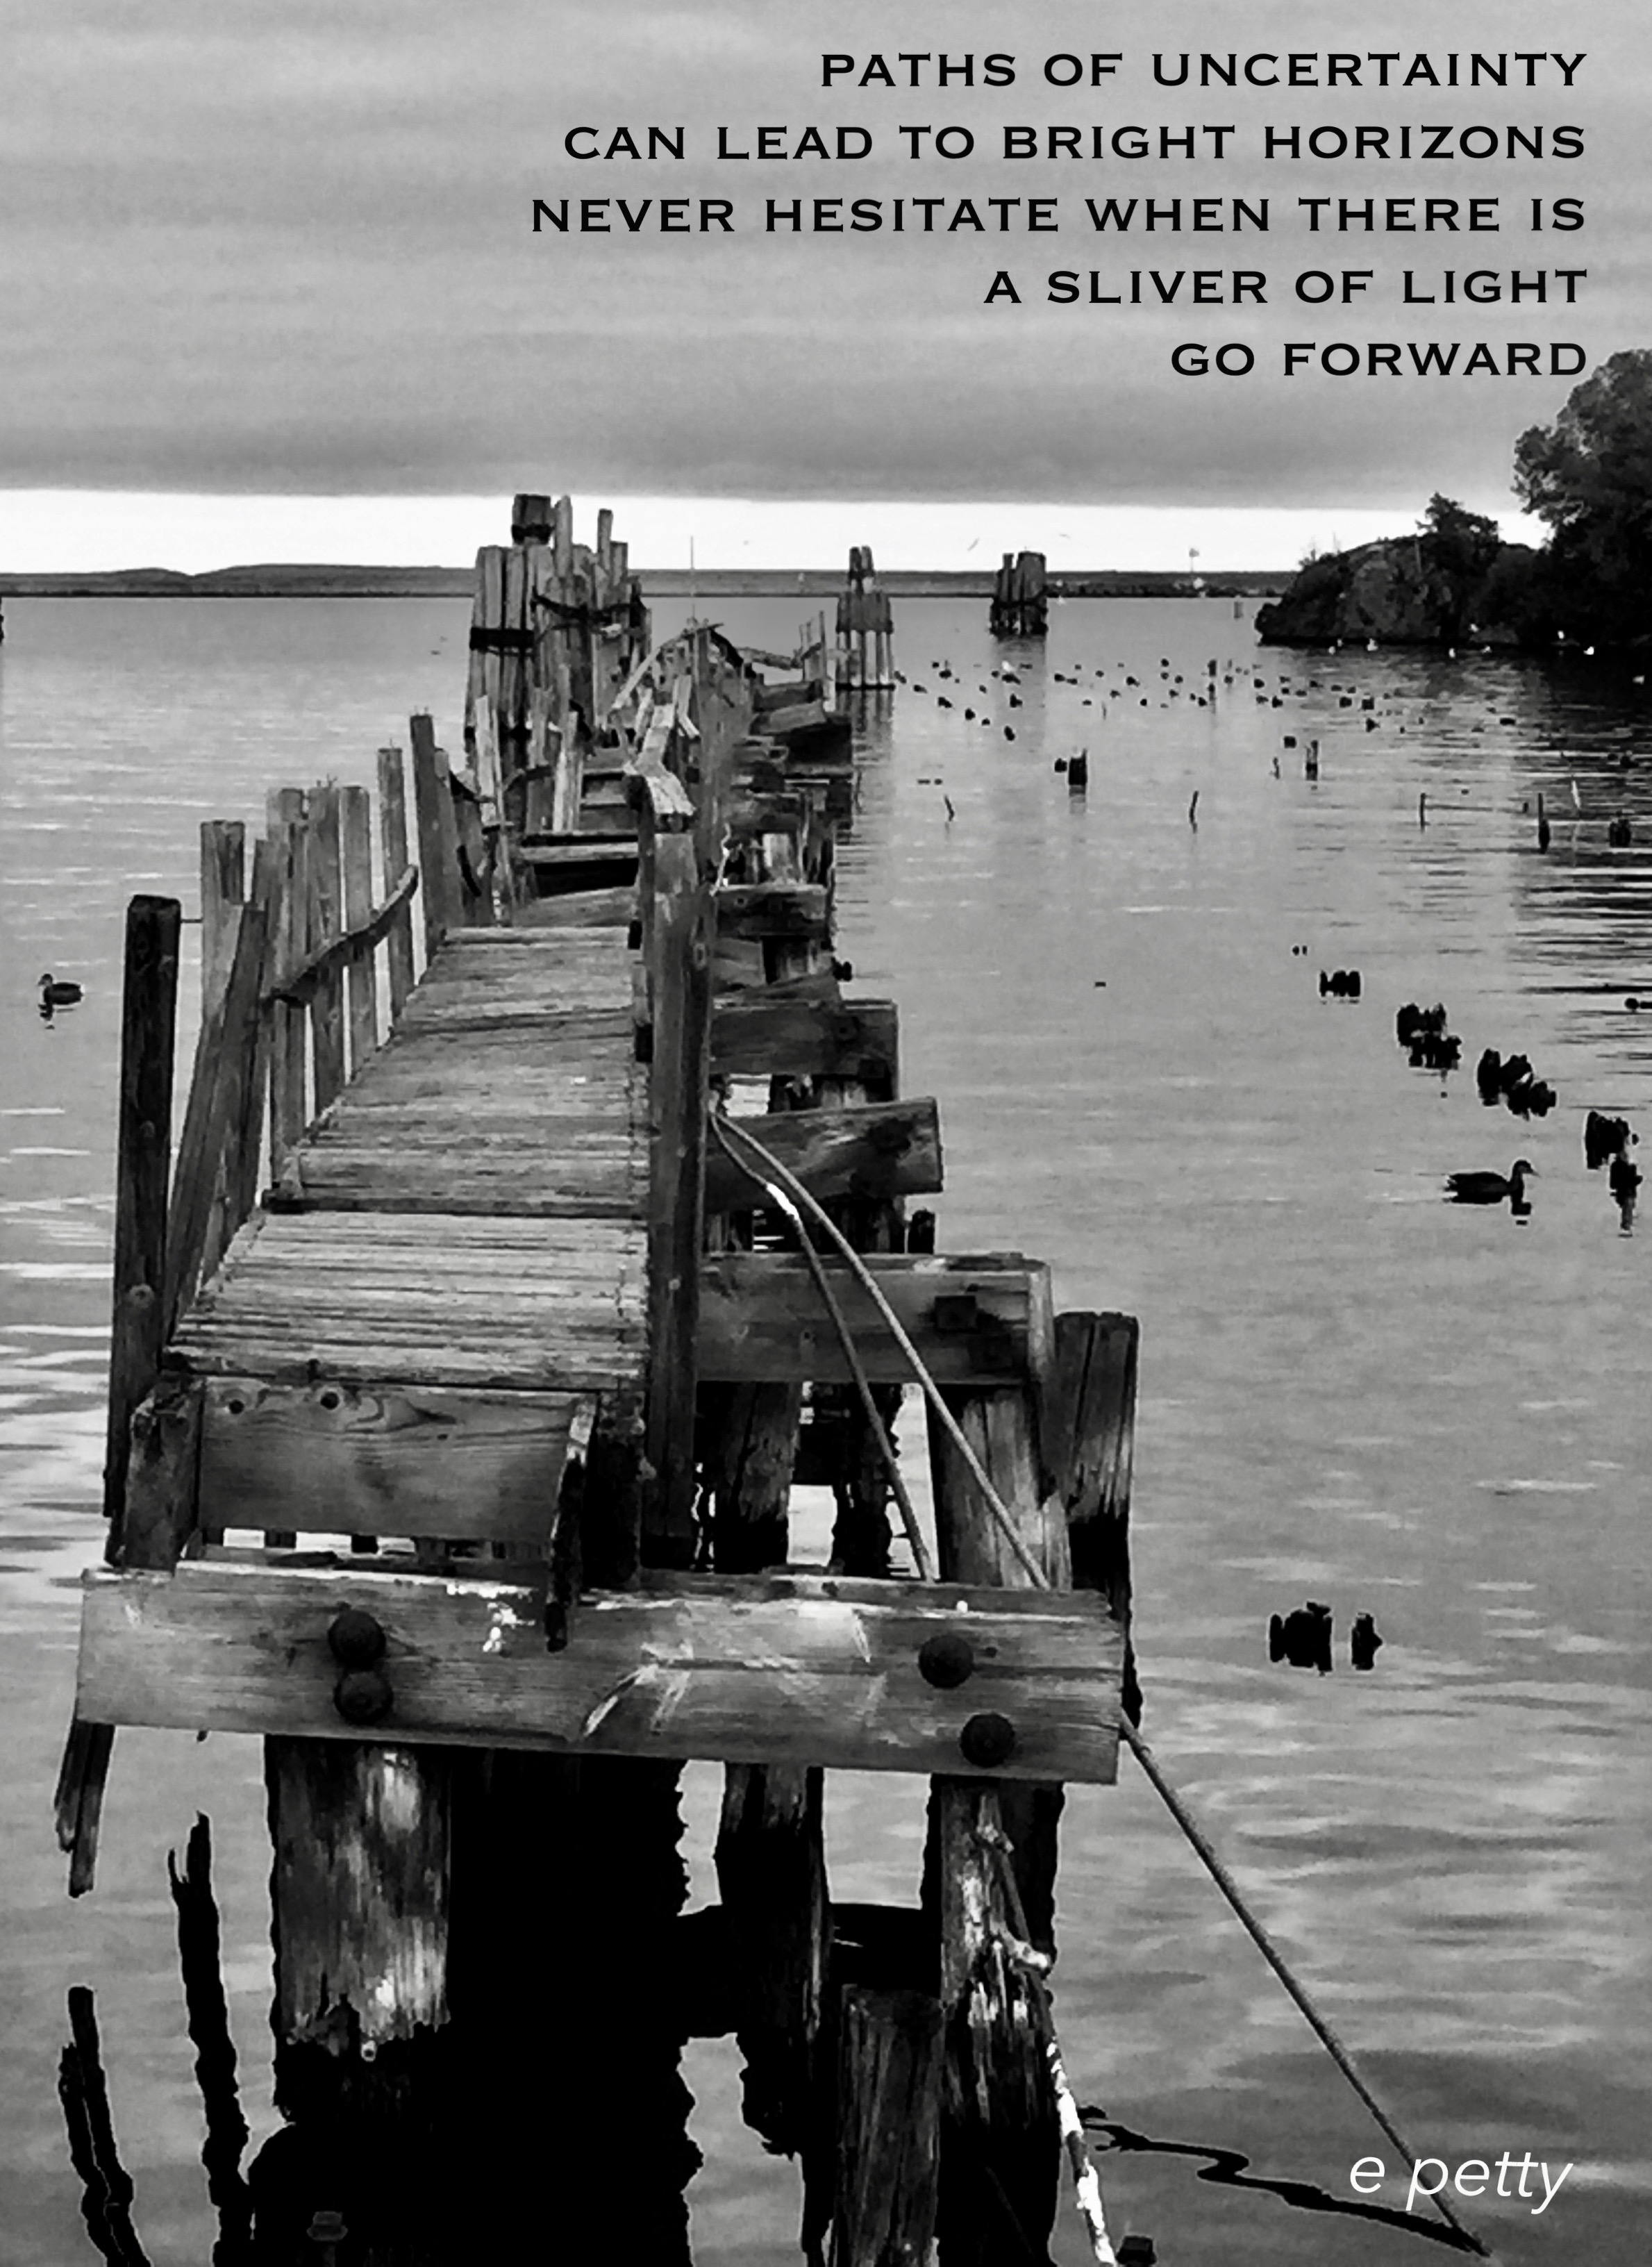 Poster of photograph of dock in water with text